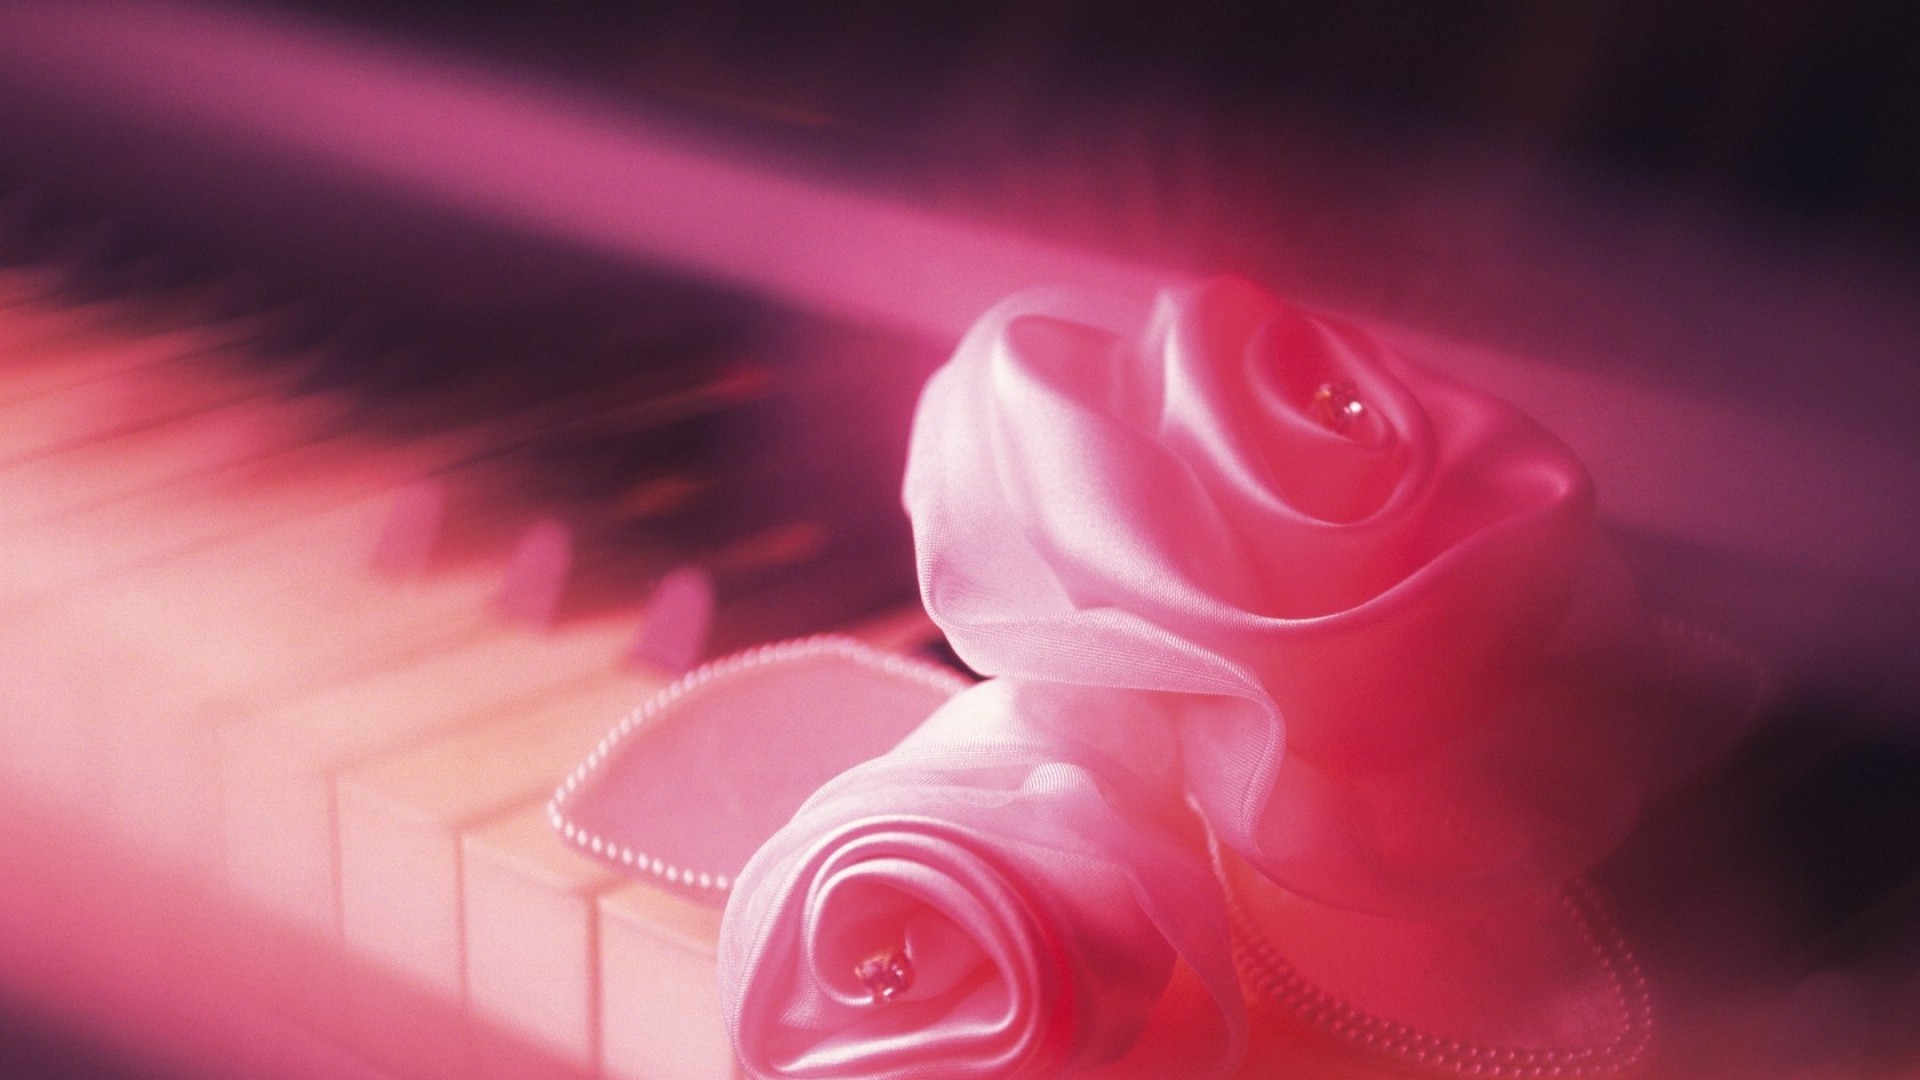 Persona Spring Floral Pale Soft Flowers Summer Light - Piano Key With Rose , HD Wallpaper & Backgrounds